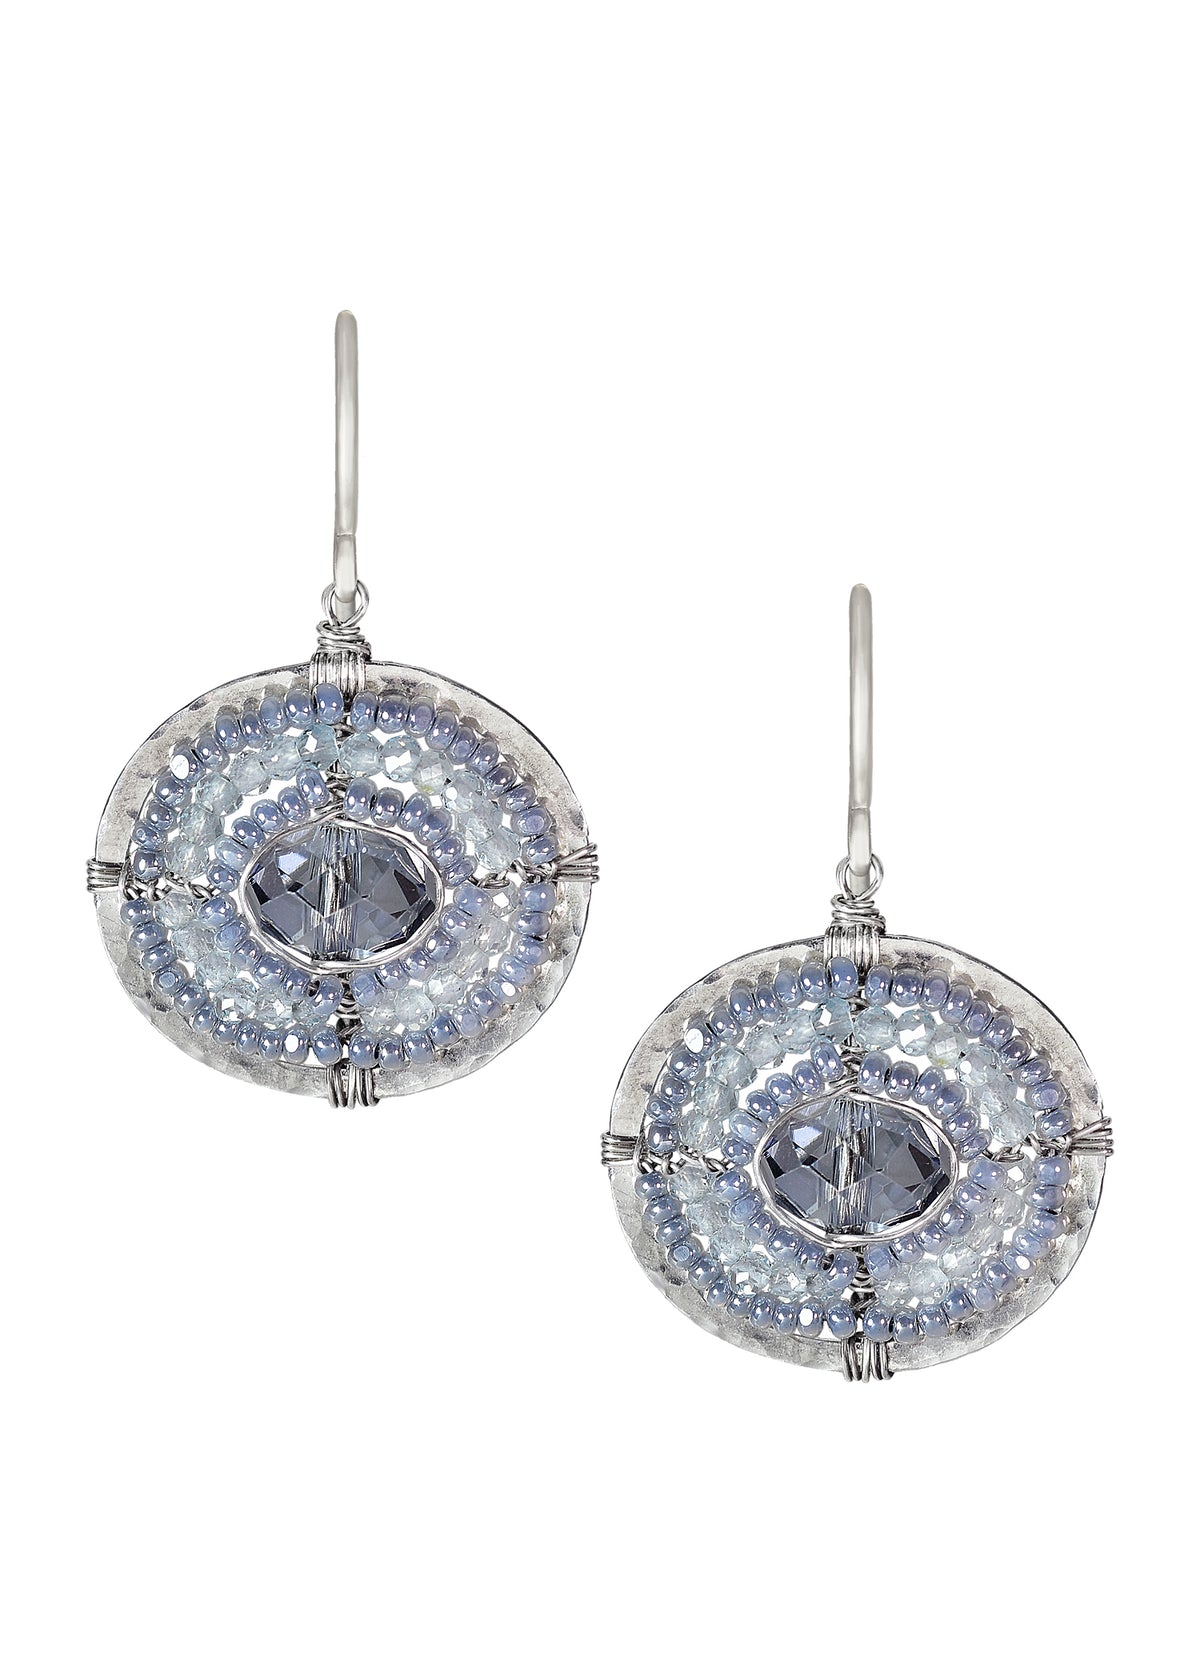 Crystal Seed beads Sterling silver Earrings measure 1-1/8&quot; in length (including the ear wires) and 3/4&quot; in width at the widest point Handmade in our Los Angeles studio